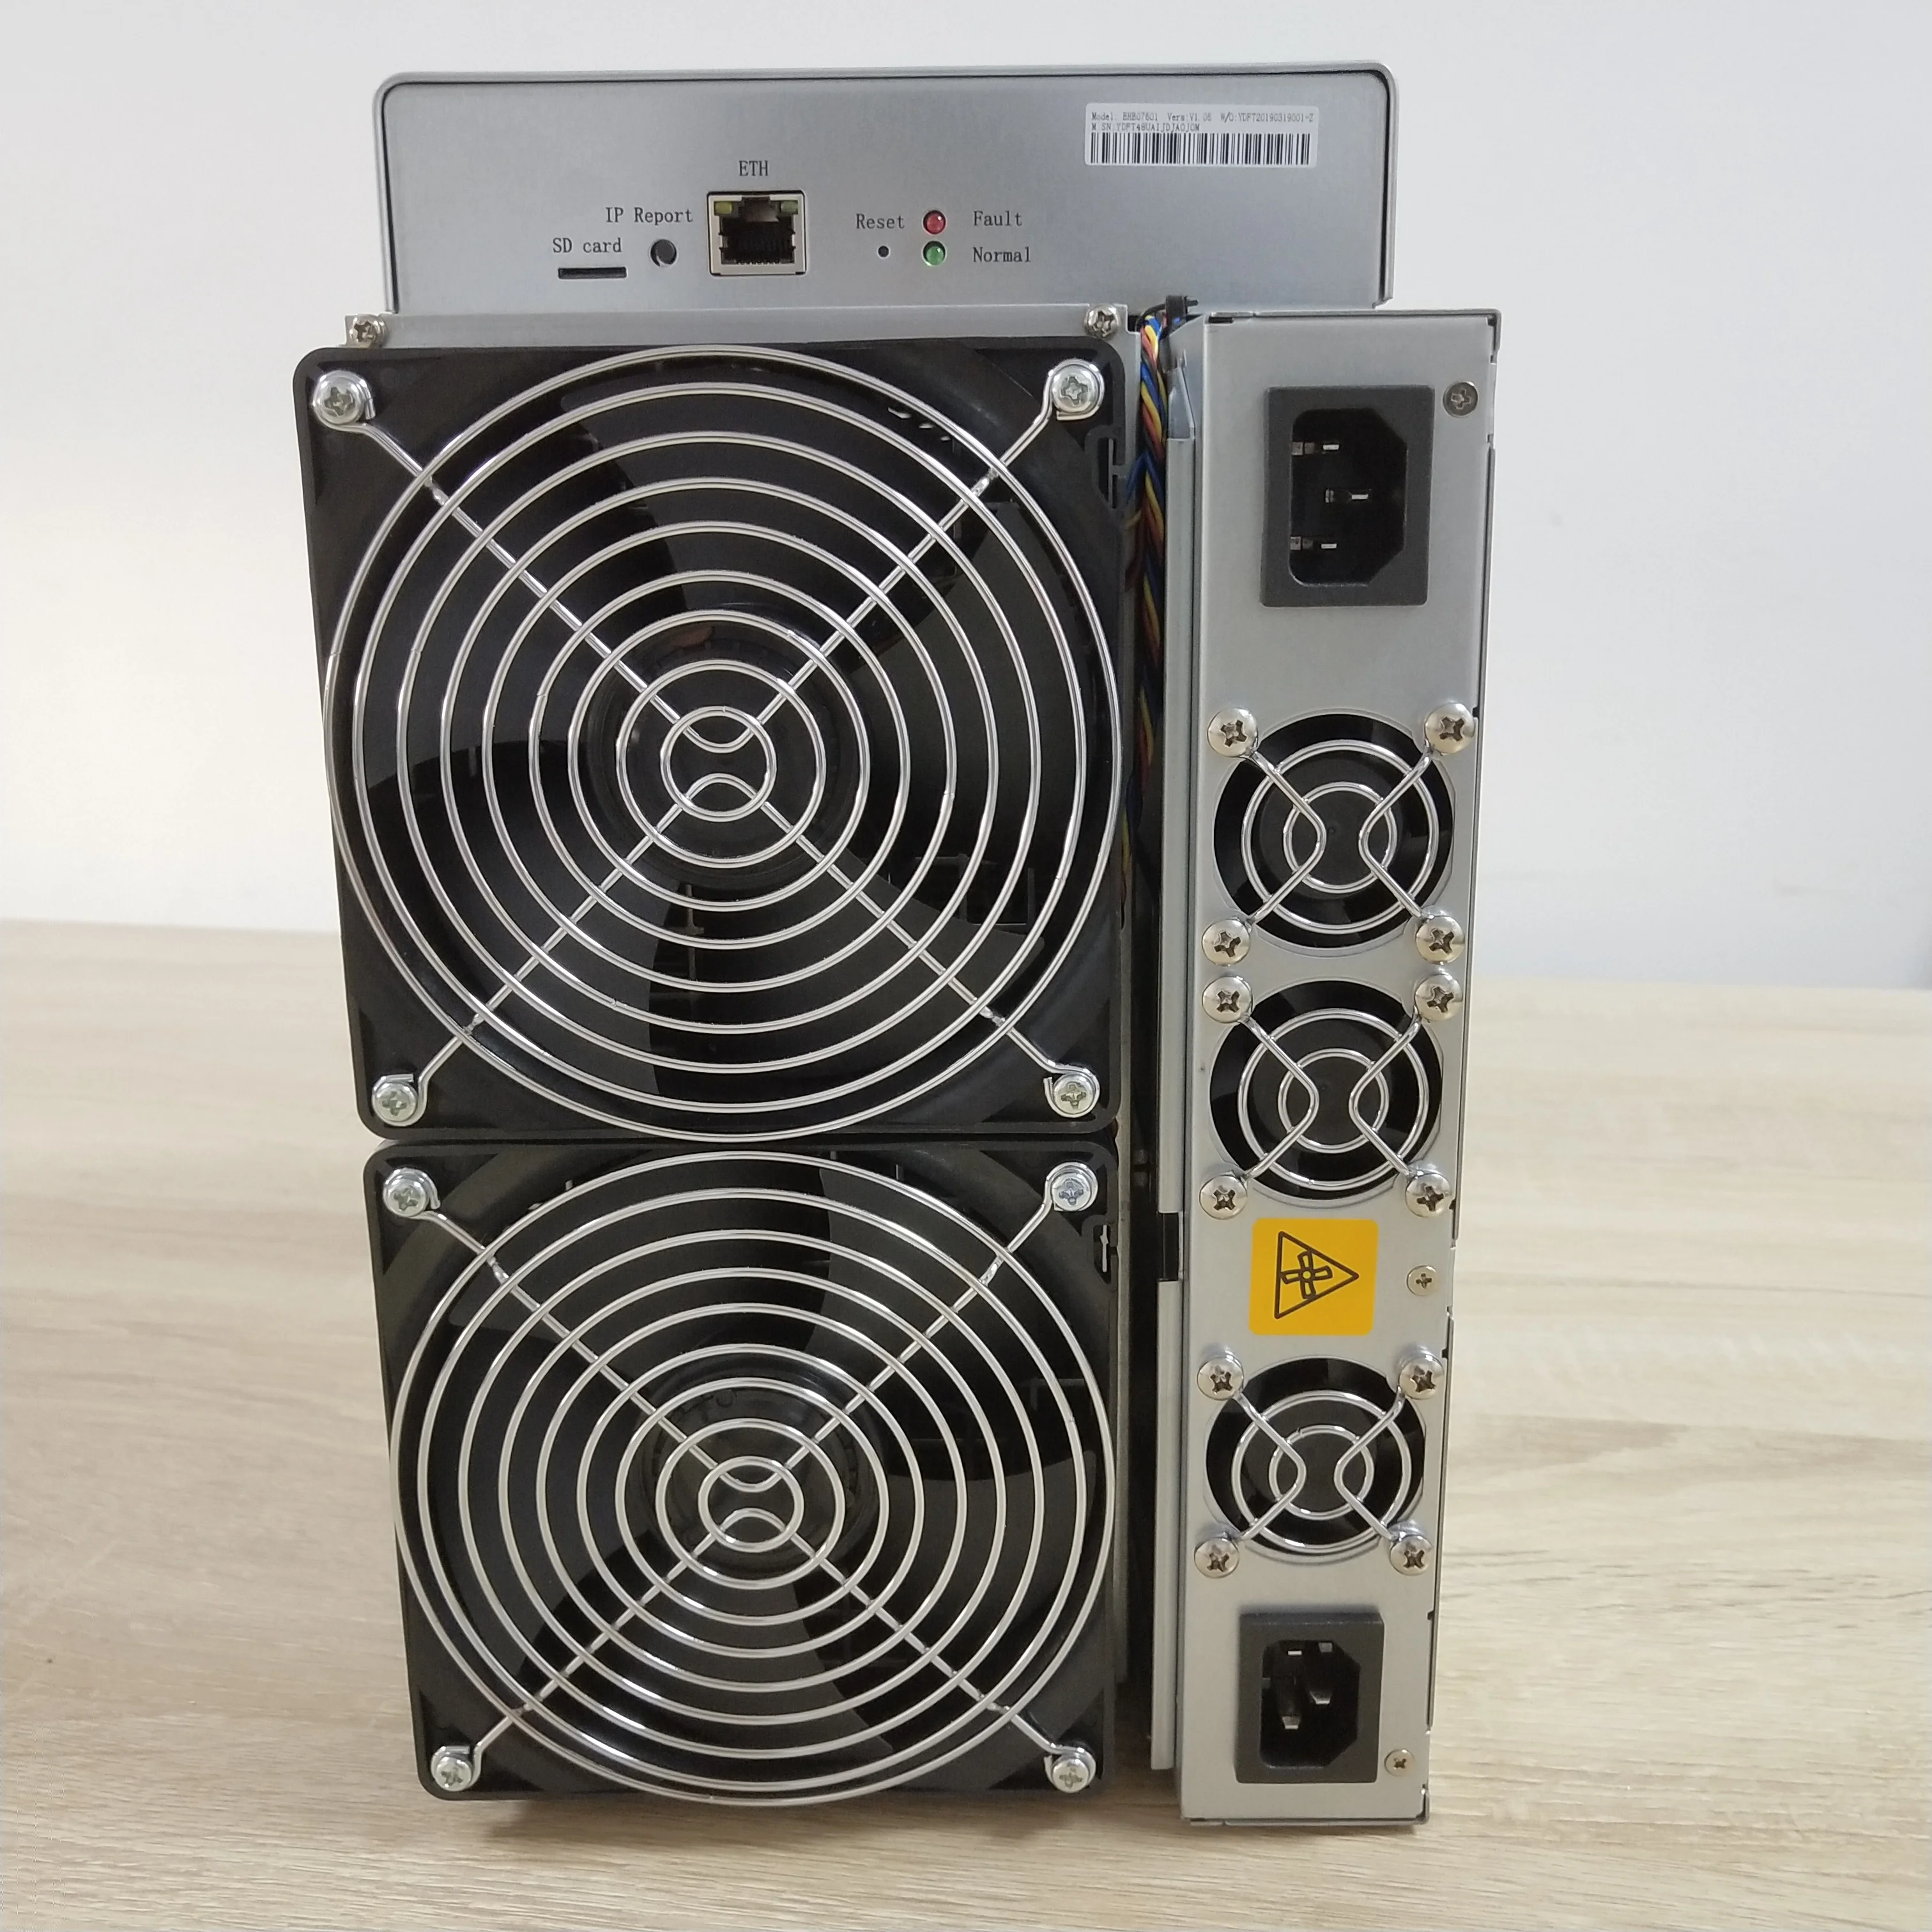 Antminer t21 190 th s. Antminer t17. Antminer t17 42 th/s. Antminer t17 42th. ASIC t17 42th.